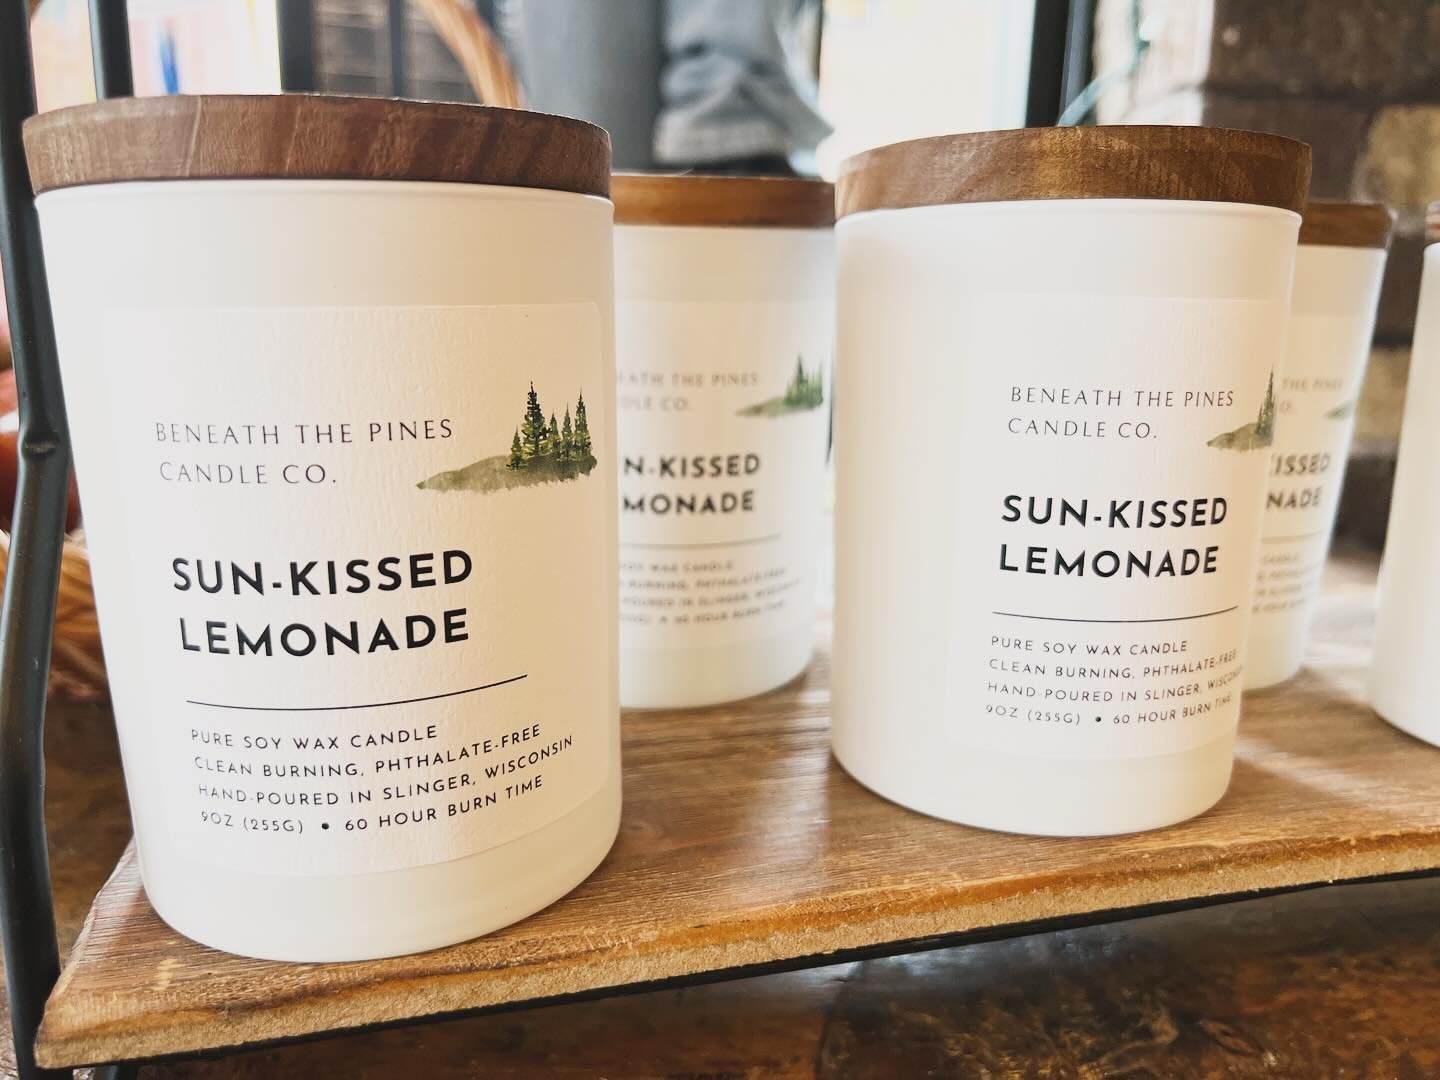 ☀️ EXCLUSIVE ITEM! ☀️
Kristi from @beneaththepinescandleco created an exclusive scent. Sun-kissed Lemonade can only be found here at The Local Collective! 🍋💜